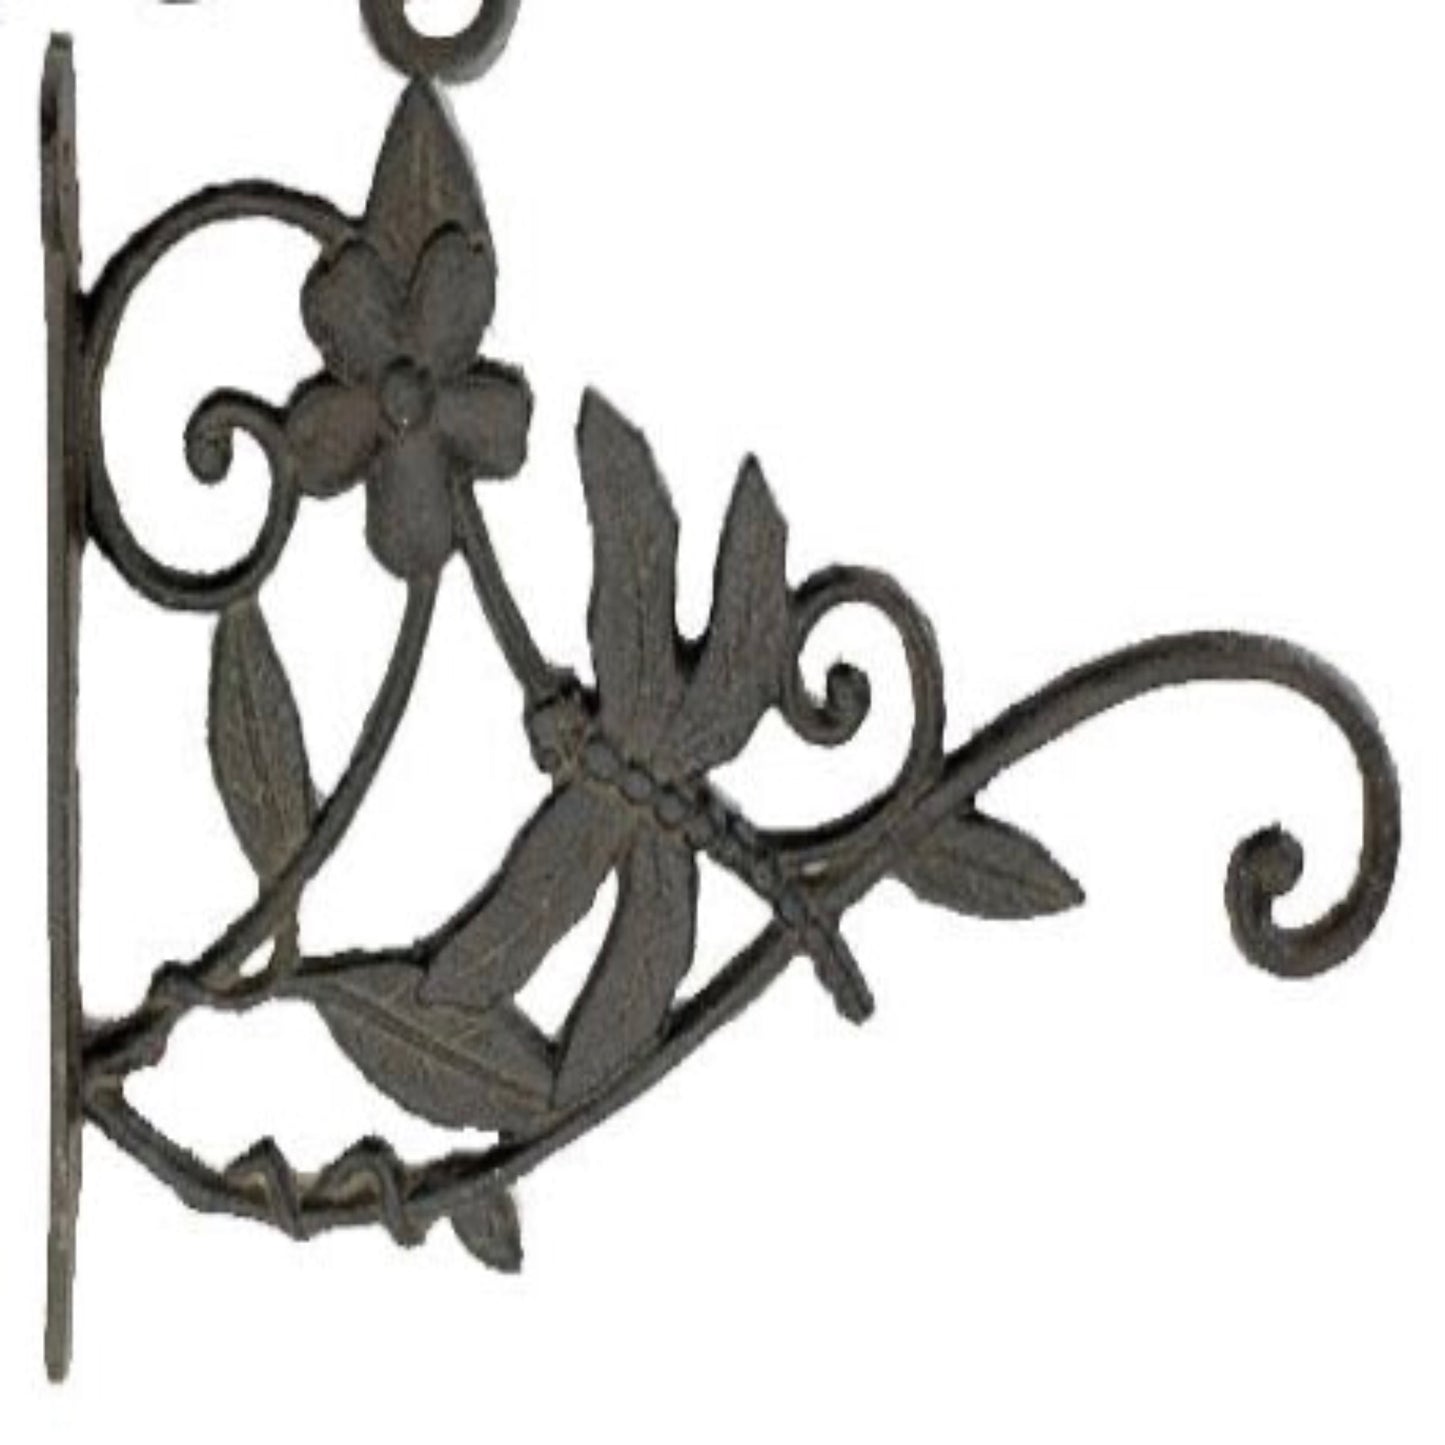 Dragonfly cast iron plant hanger